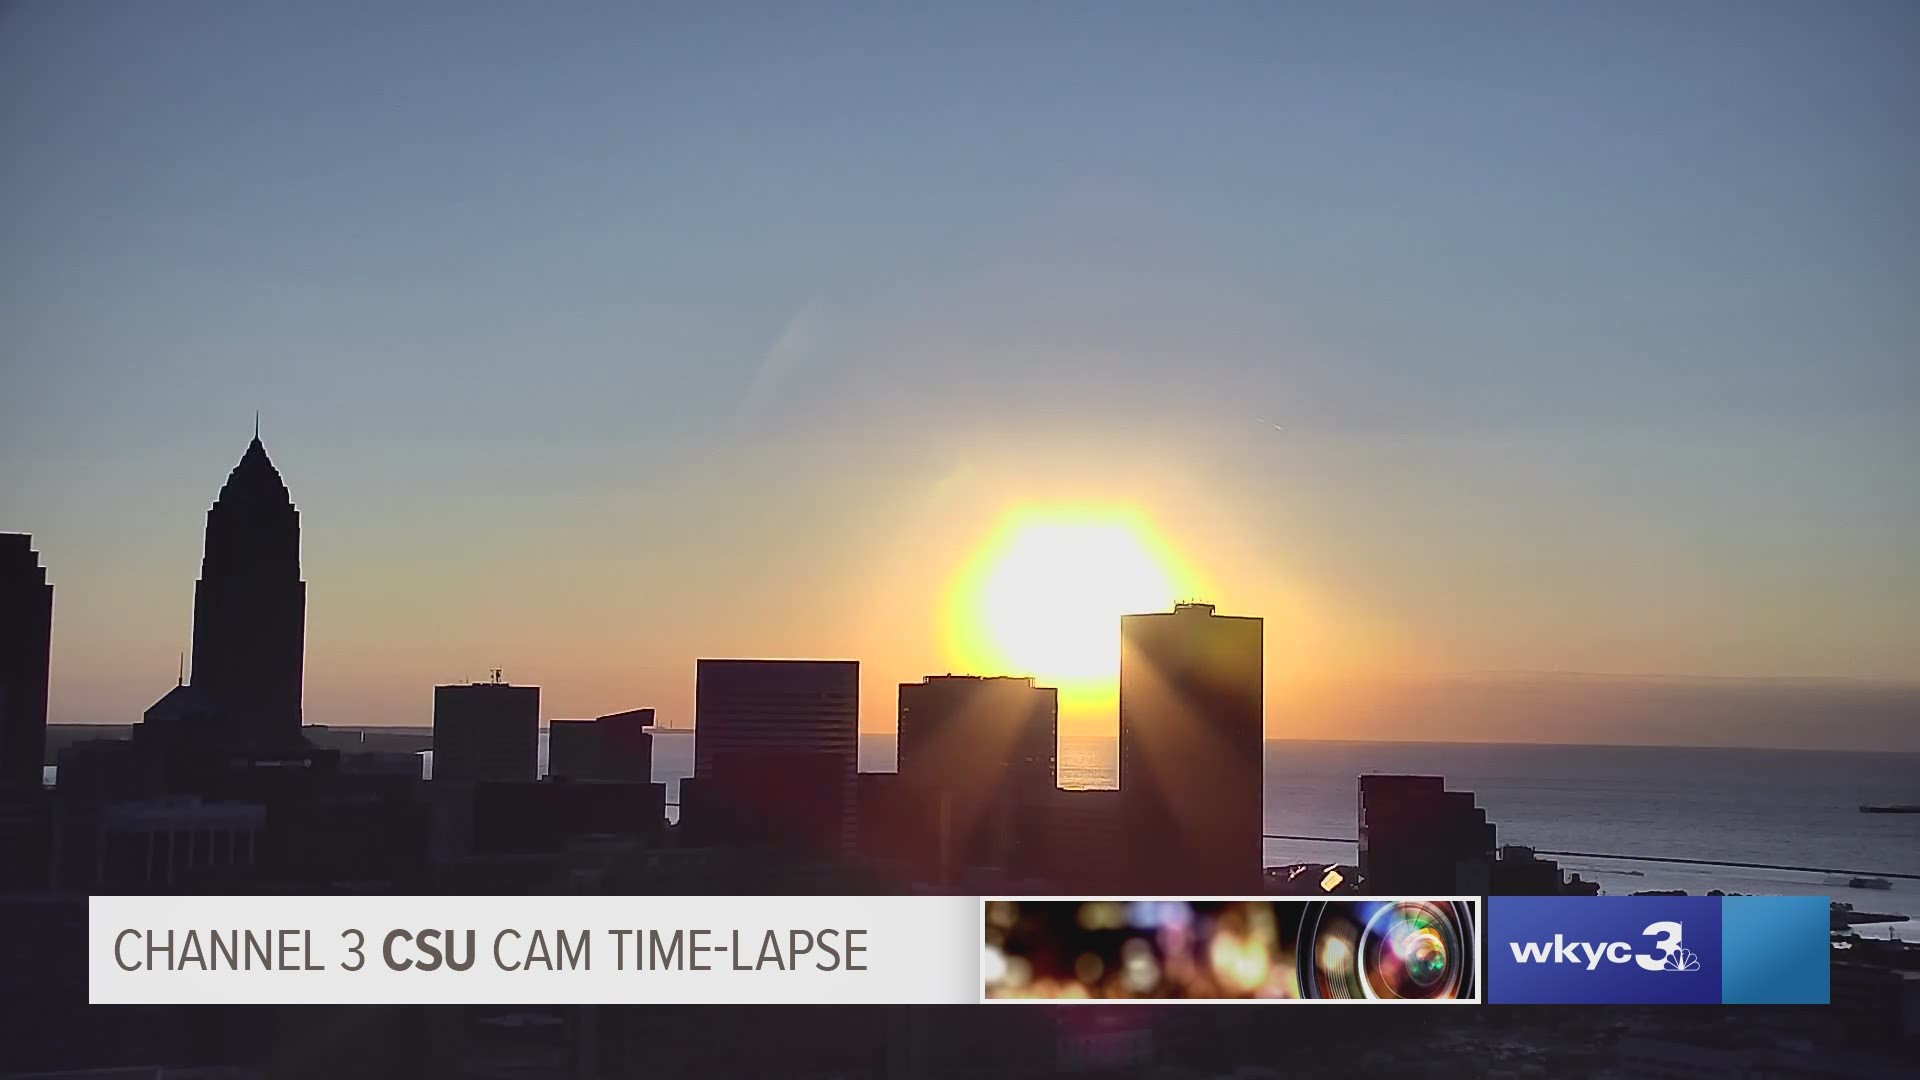 There she goes! A clear sky northeast Ohio sunset time-lapse tonight from the Channel 3 CSU Cam for August 29, 2019. #3weather